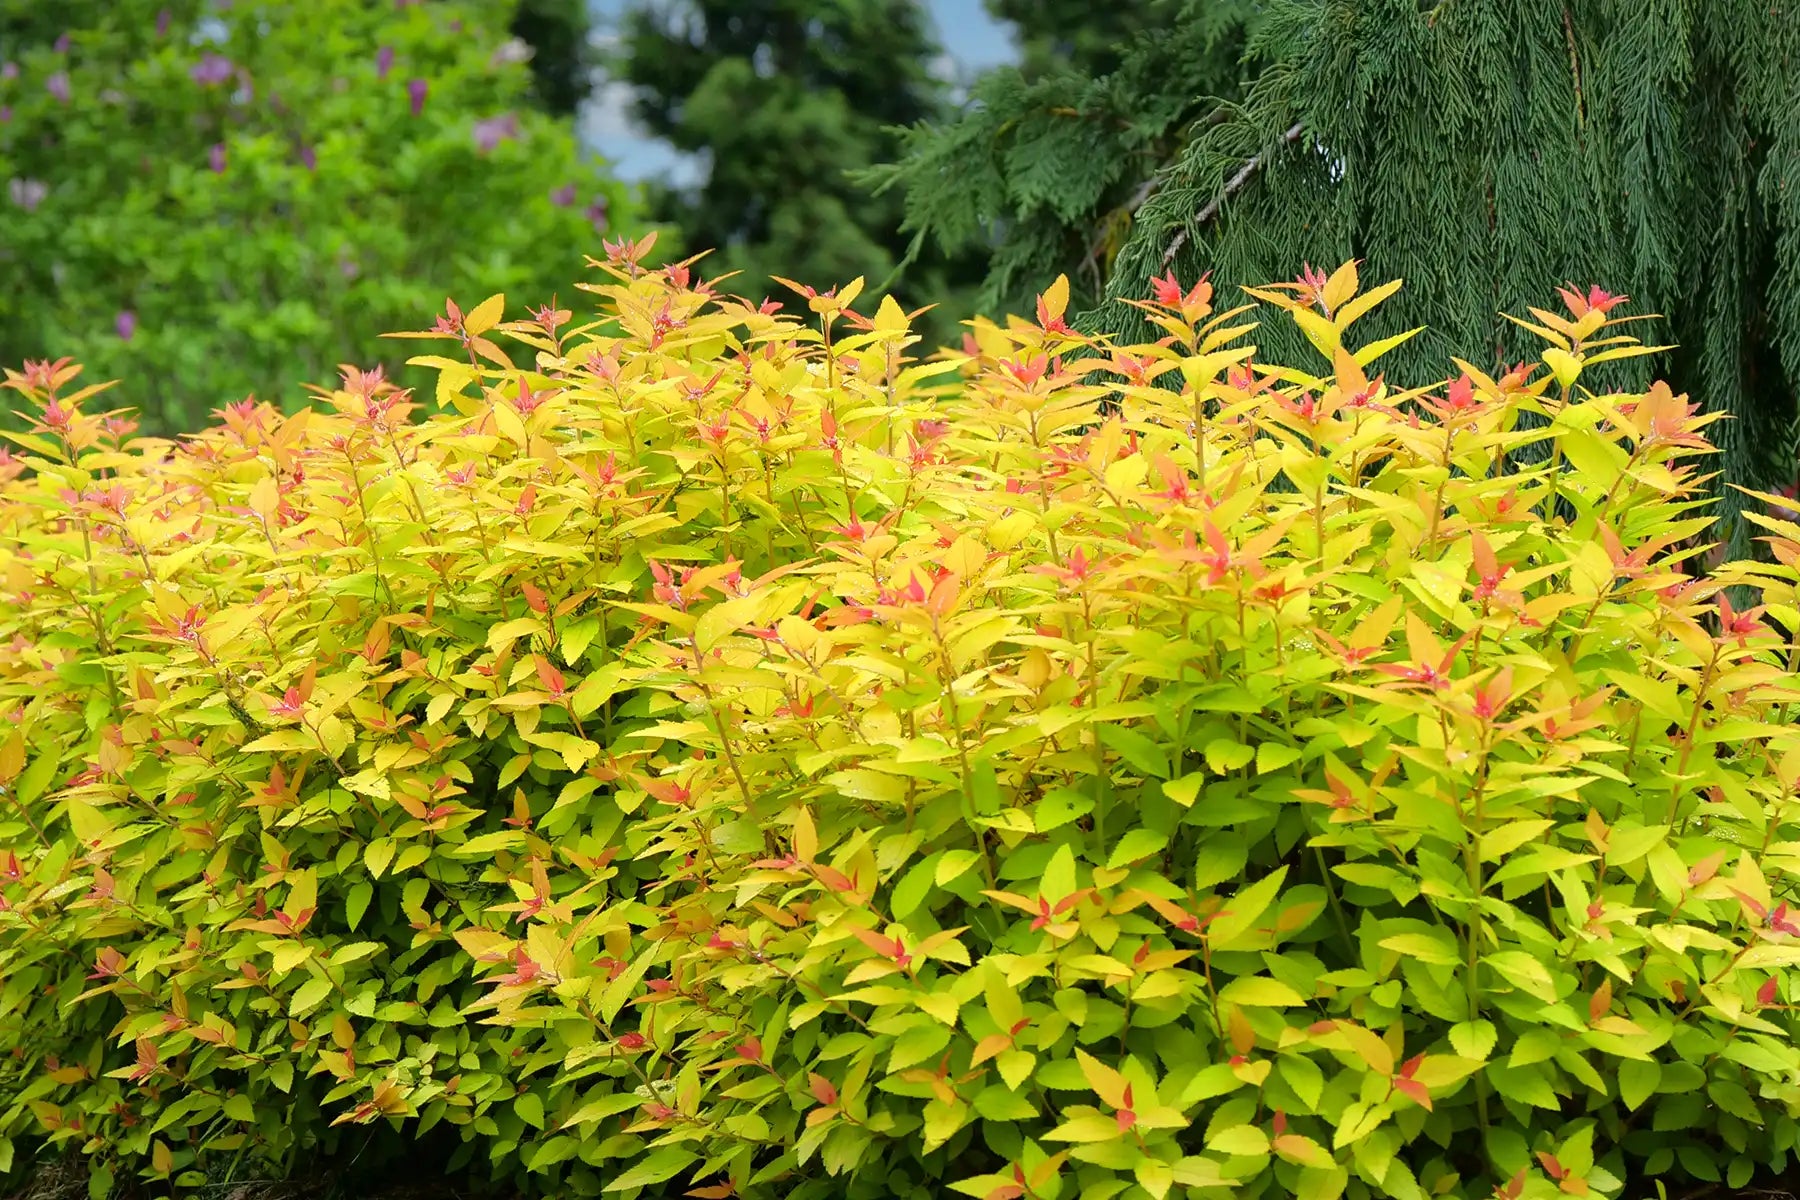 Here, Doube Play® Candy Corn Spirea explodes with brightly colored red-tipped, yellow and green foliage. In the background,  evergreen trees and purple blossomed tree are a contrasting backdrop.